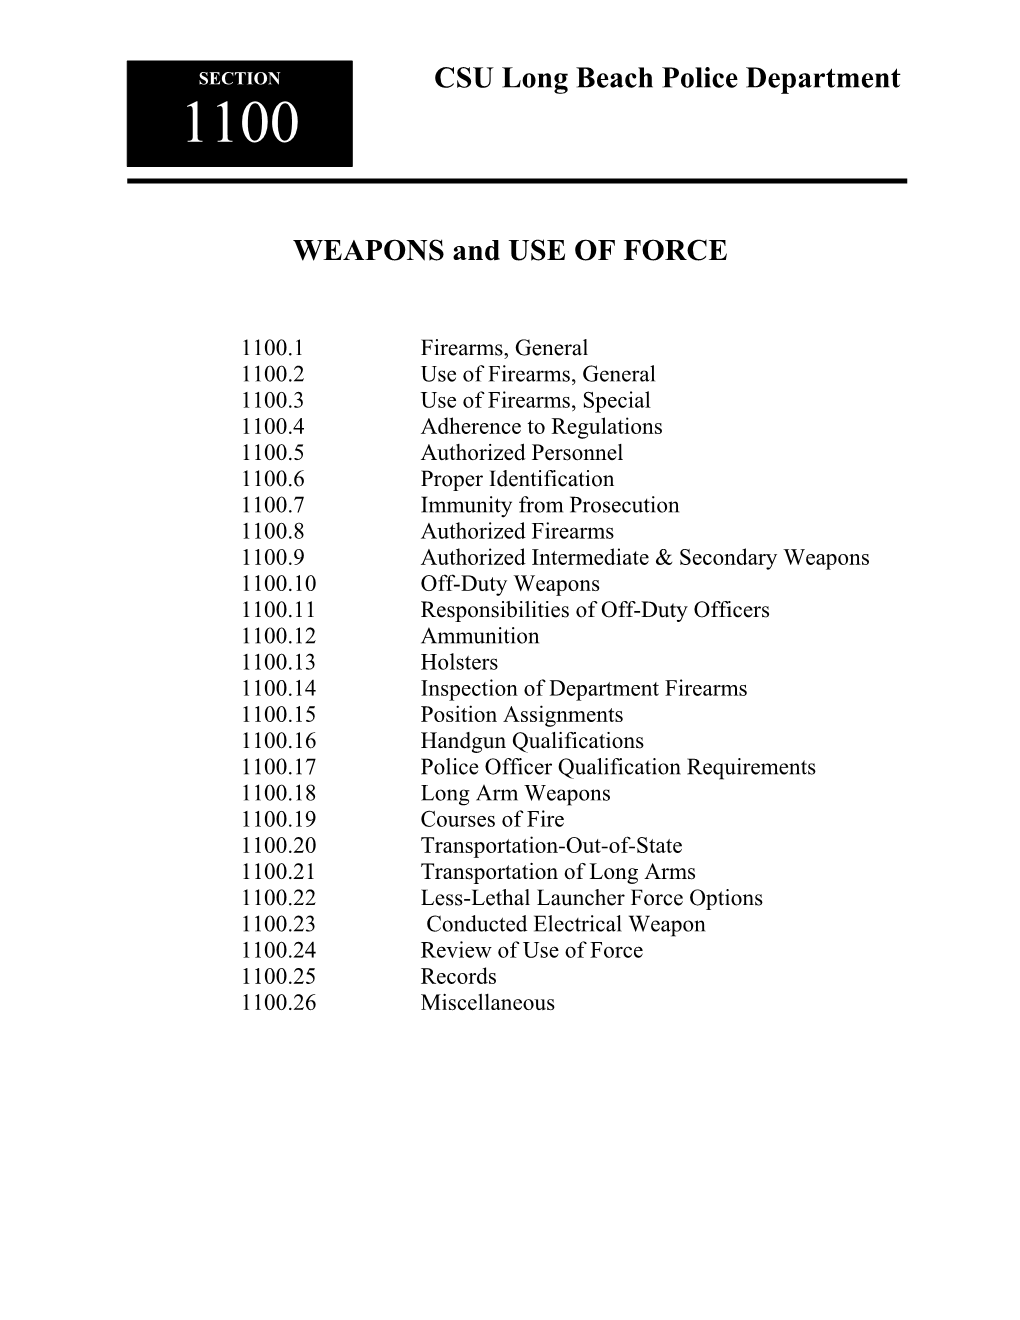 Section 1100: Weapons and Use of Force